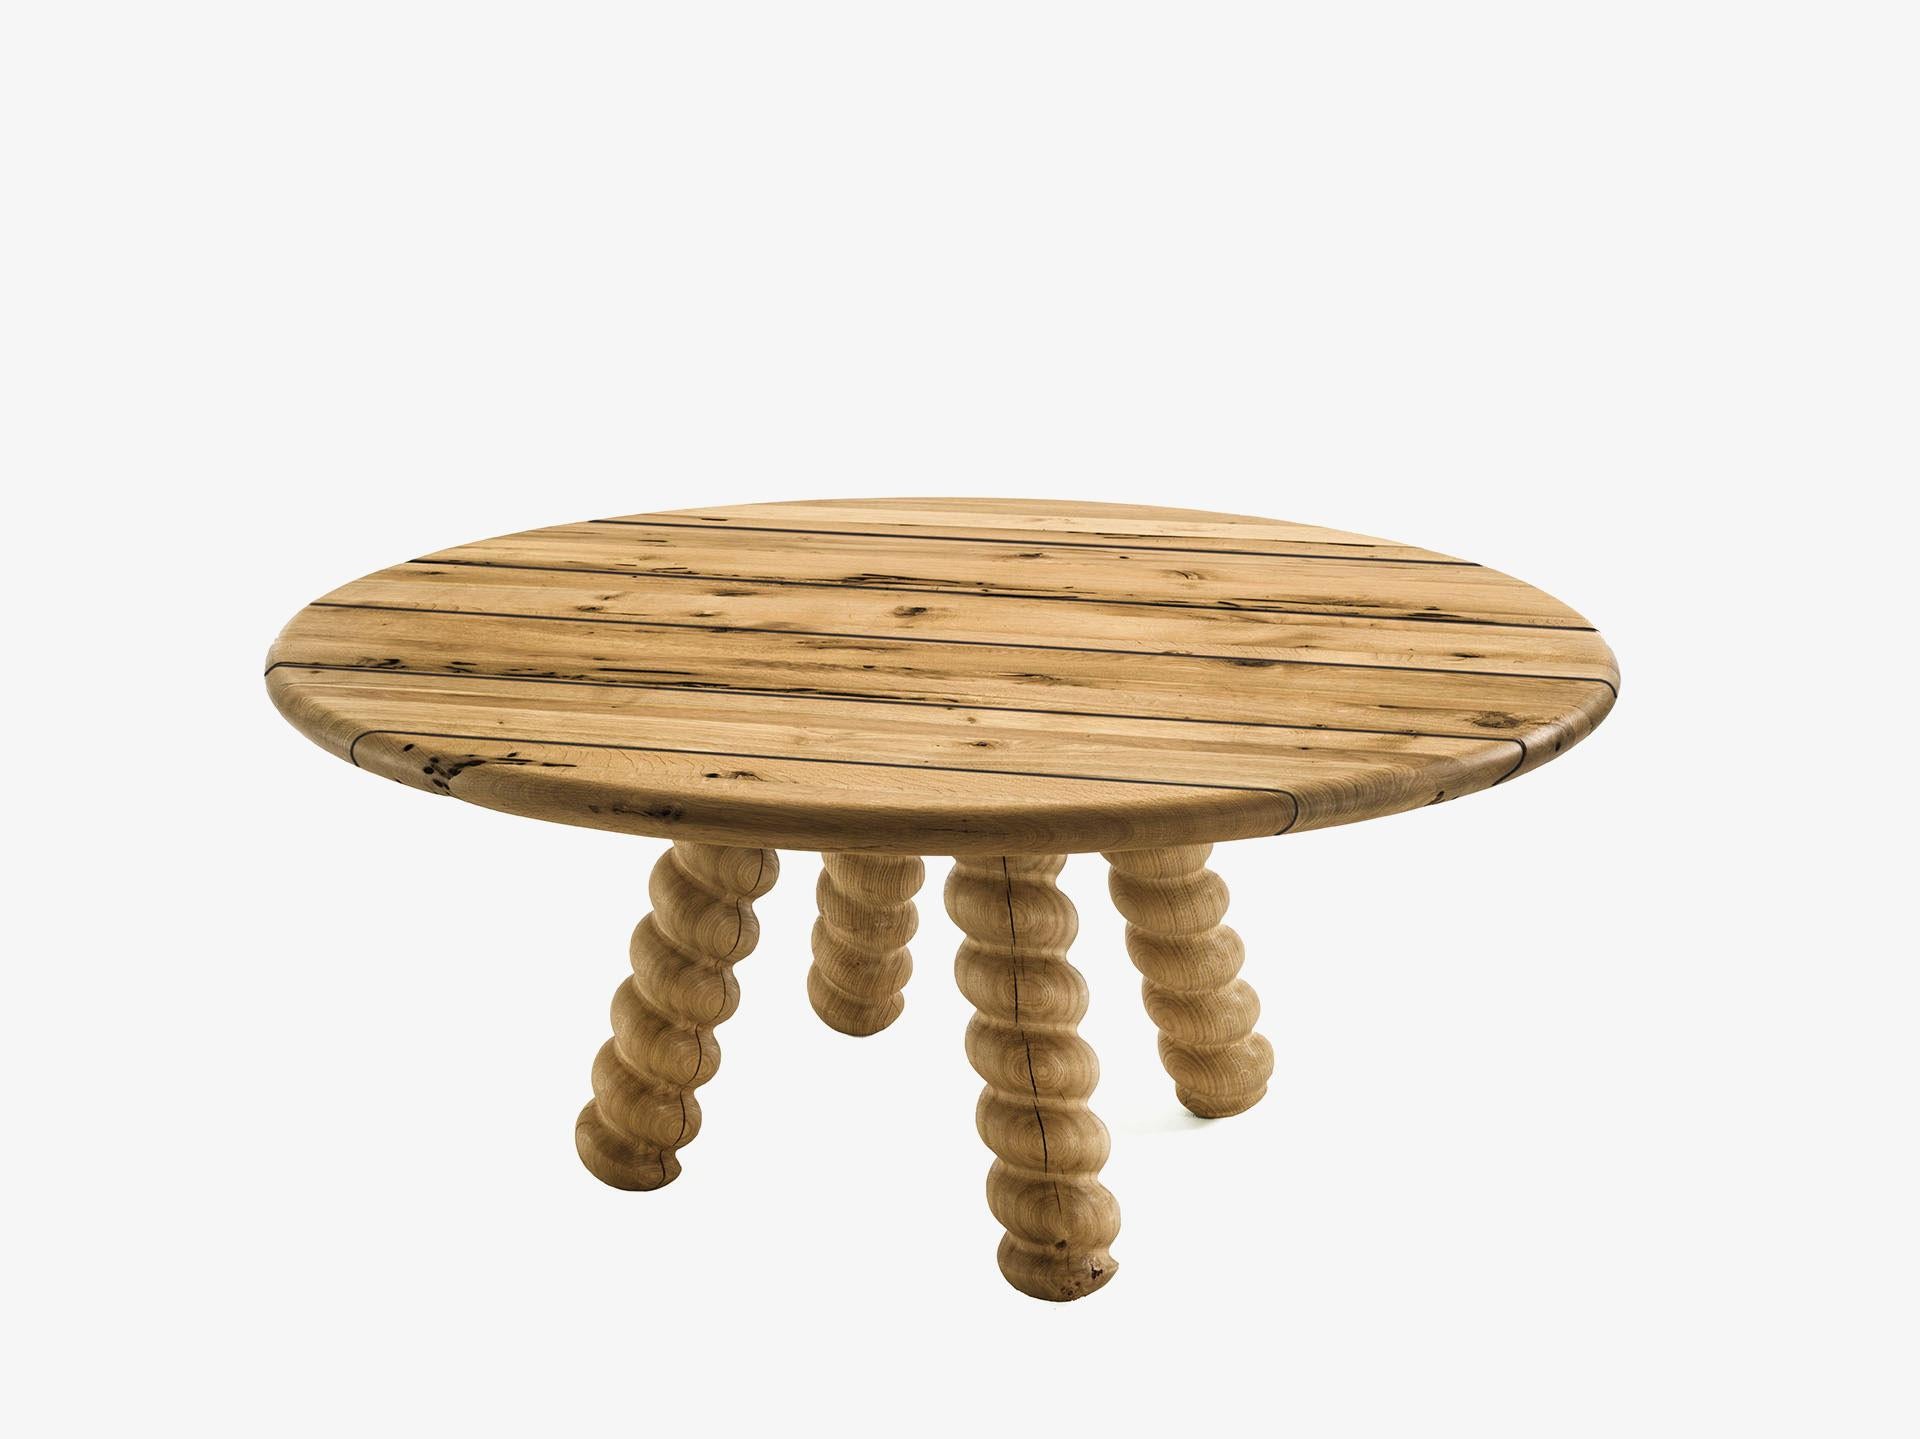 Italian Bric Round Wood Dining Table, Designed by Mario Bellini, Made in Italy  For Sale